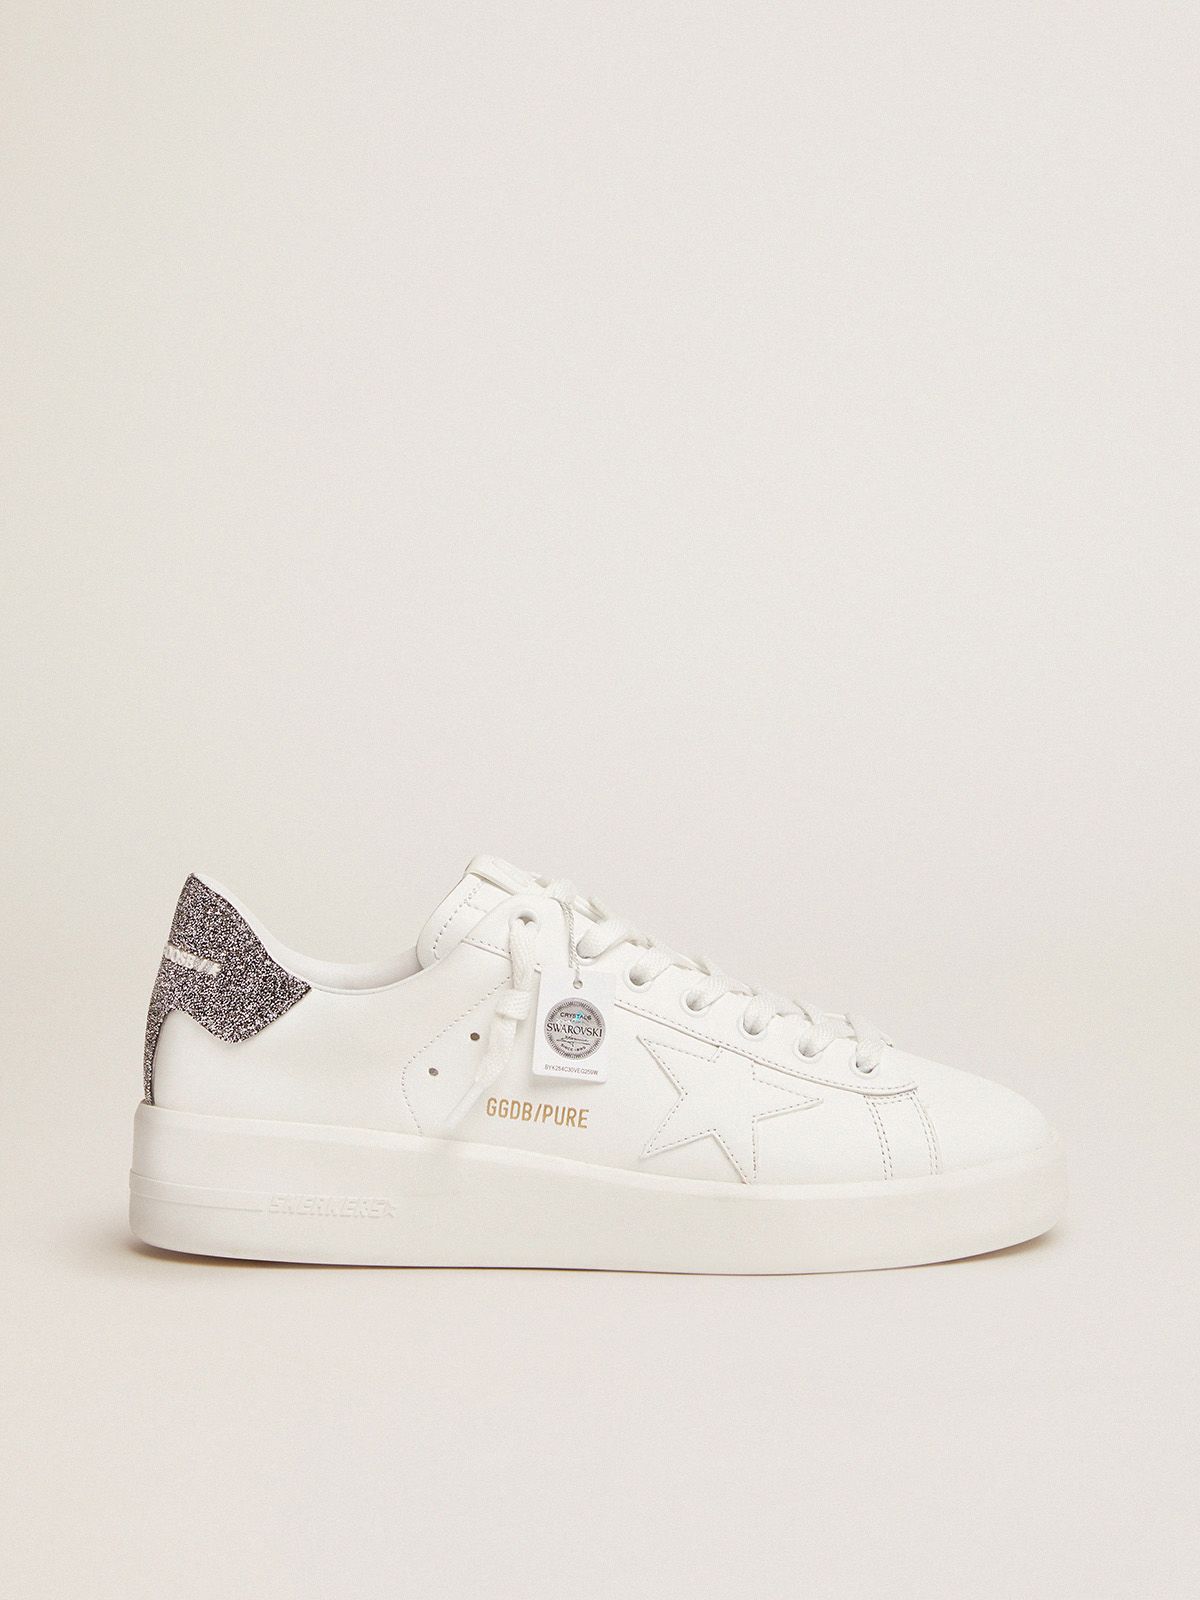 Purestar sneakers in white leather with silver crystal heel tab | 